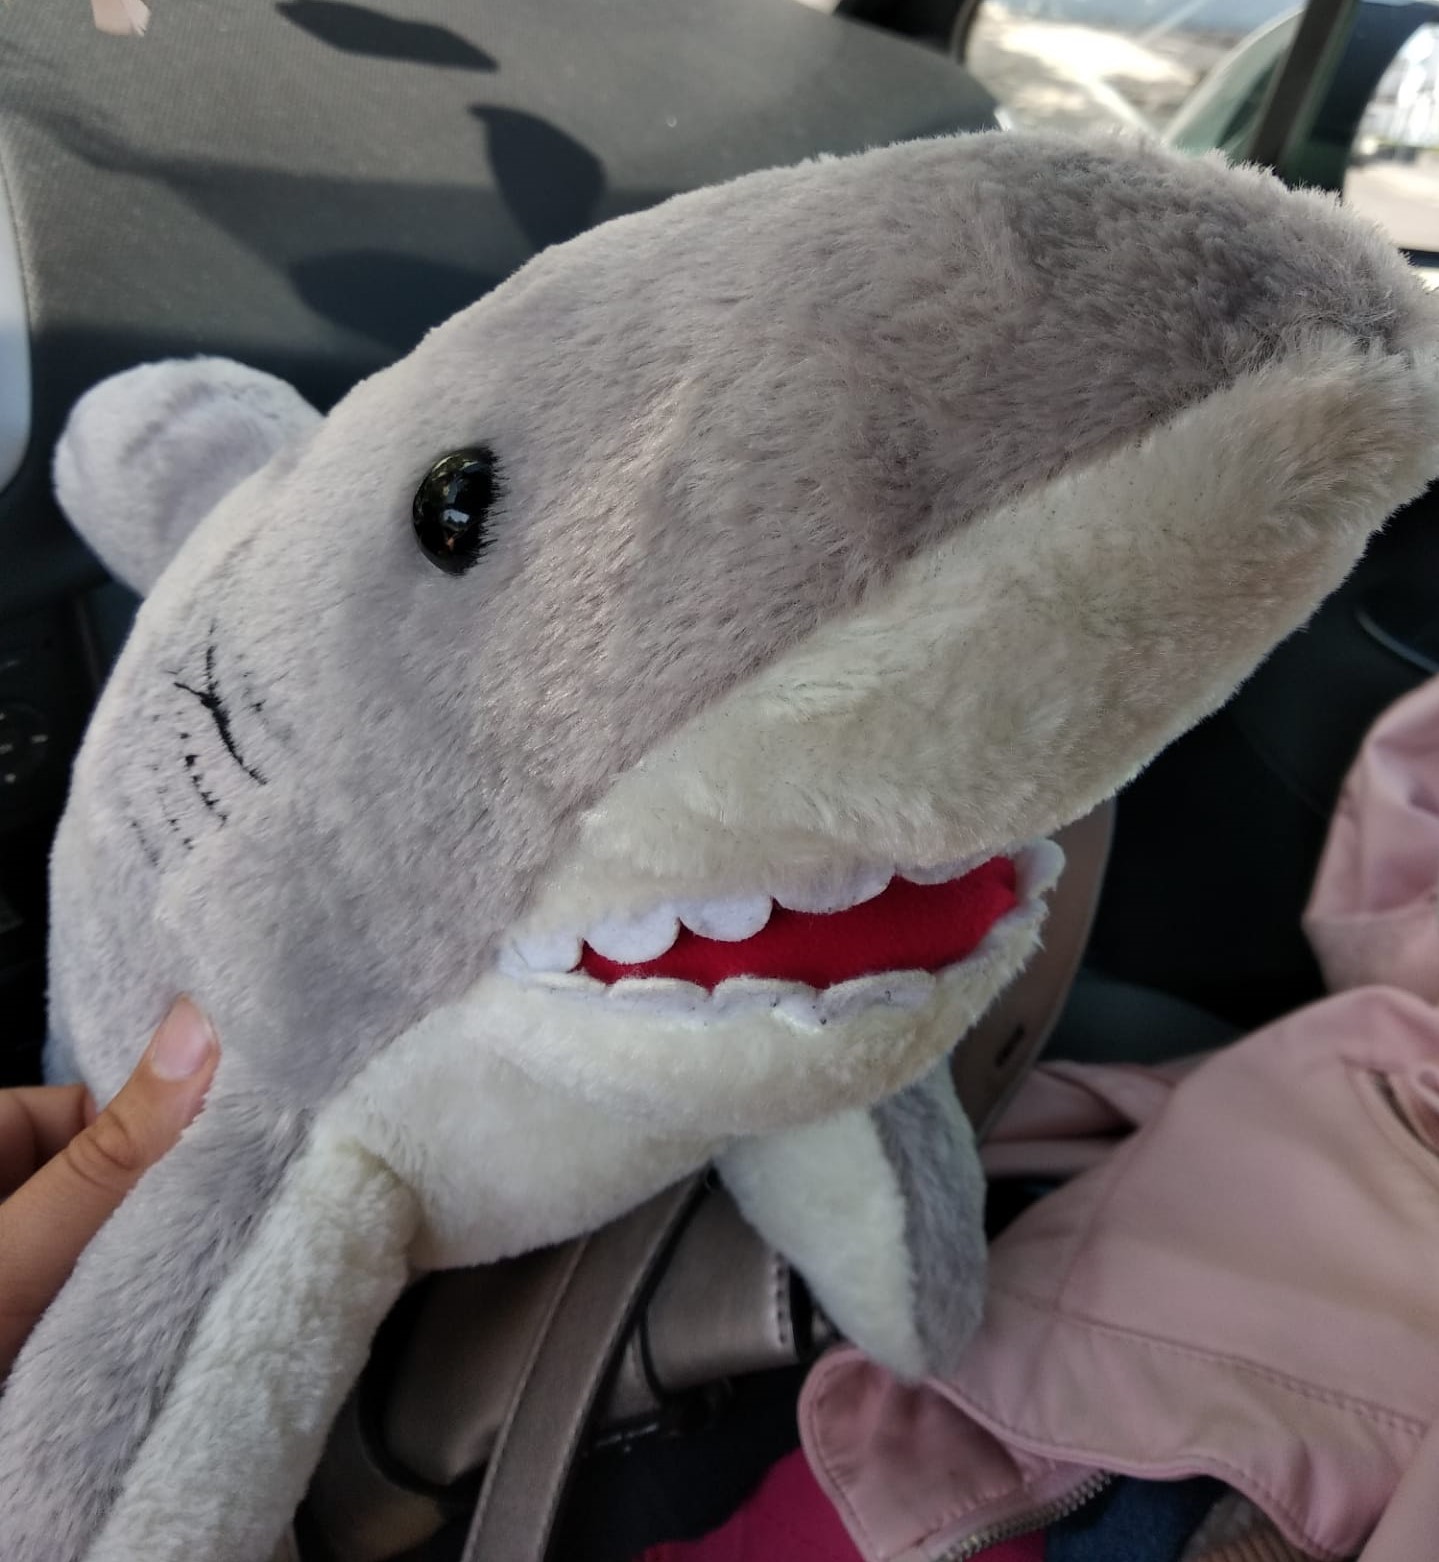 Sharky recovered